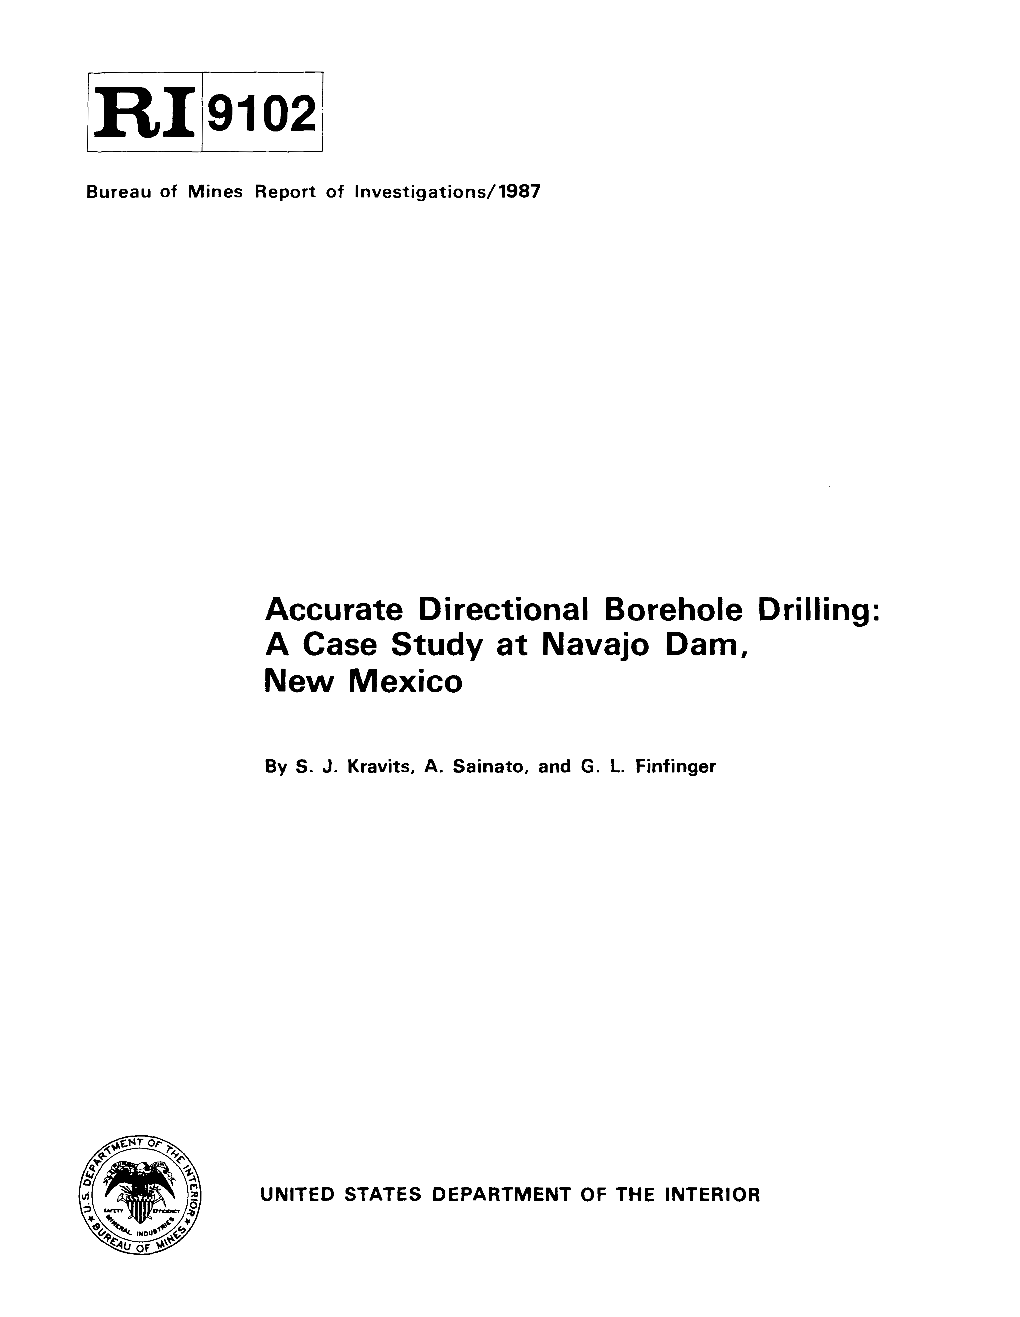 Accurate Directional Borehole Drilling: a Case Study at Navajo Dam, New Mexico